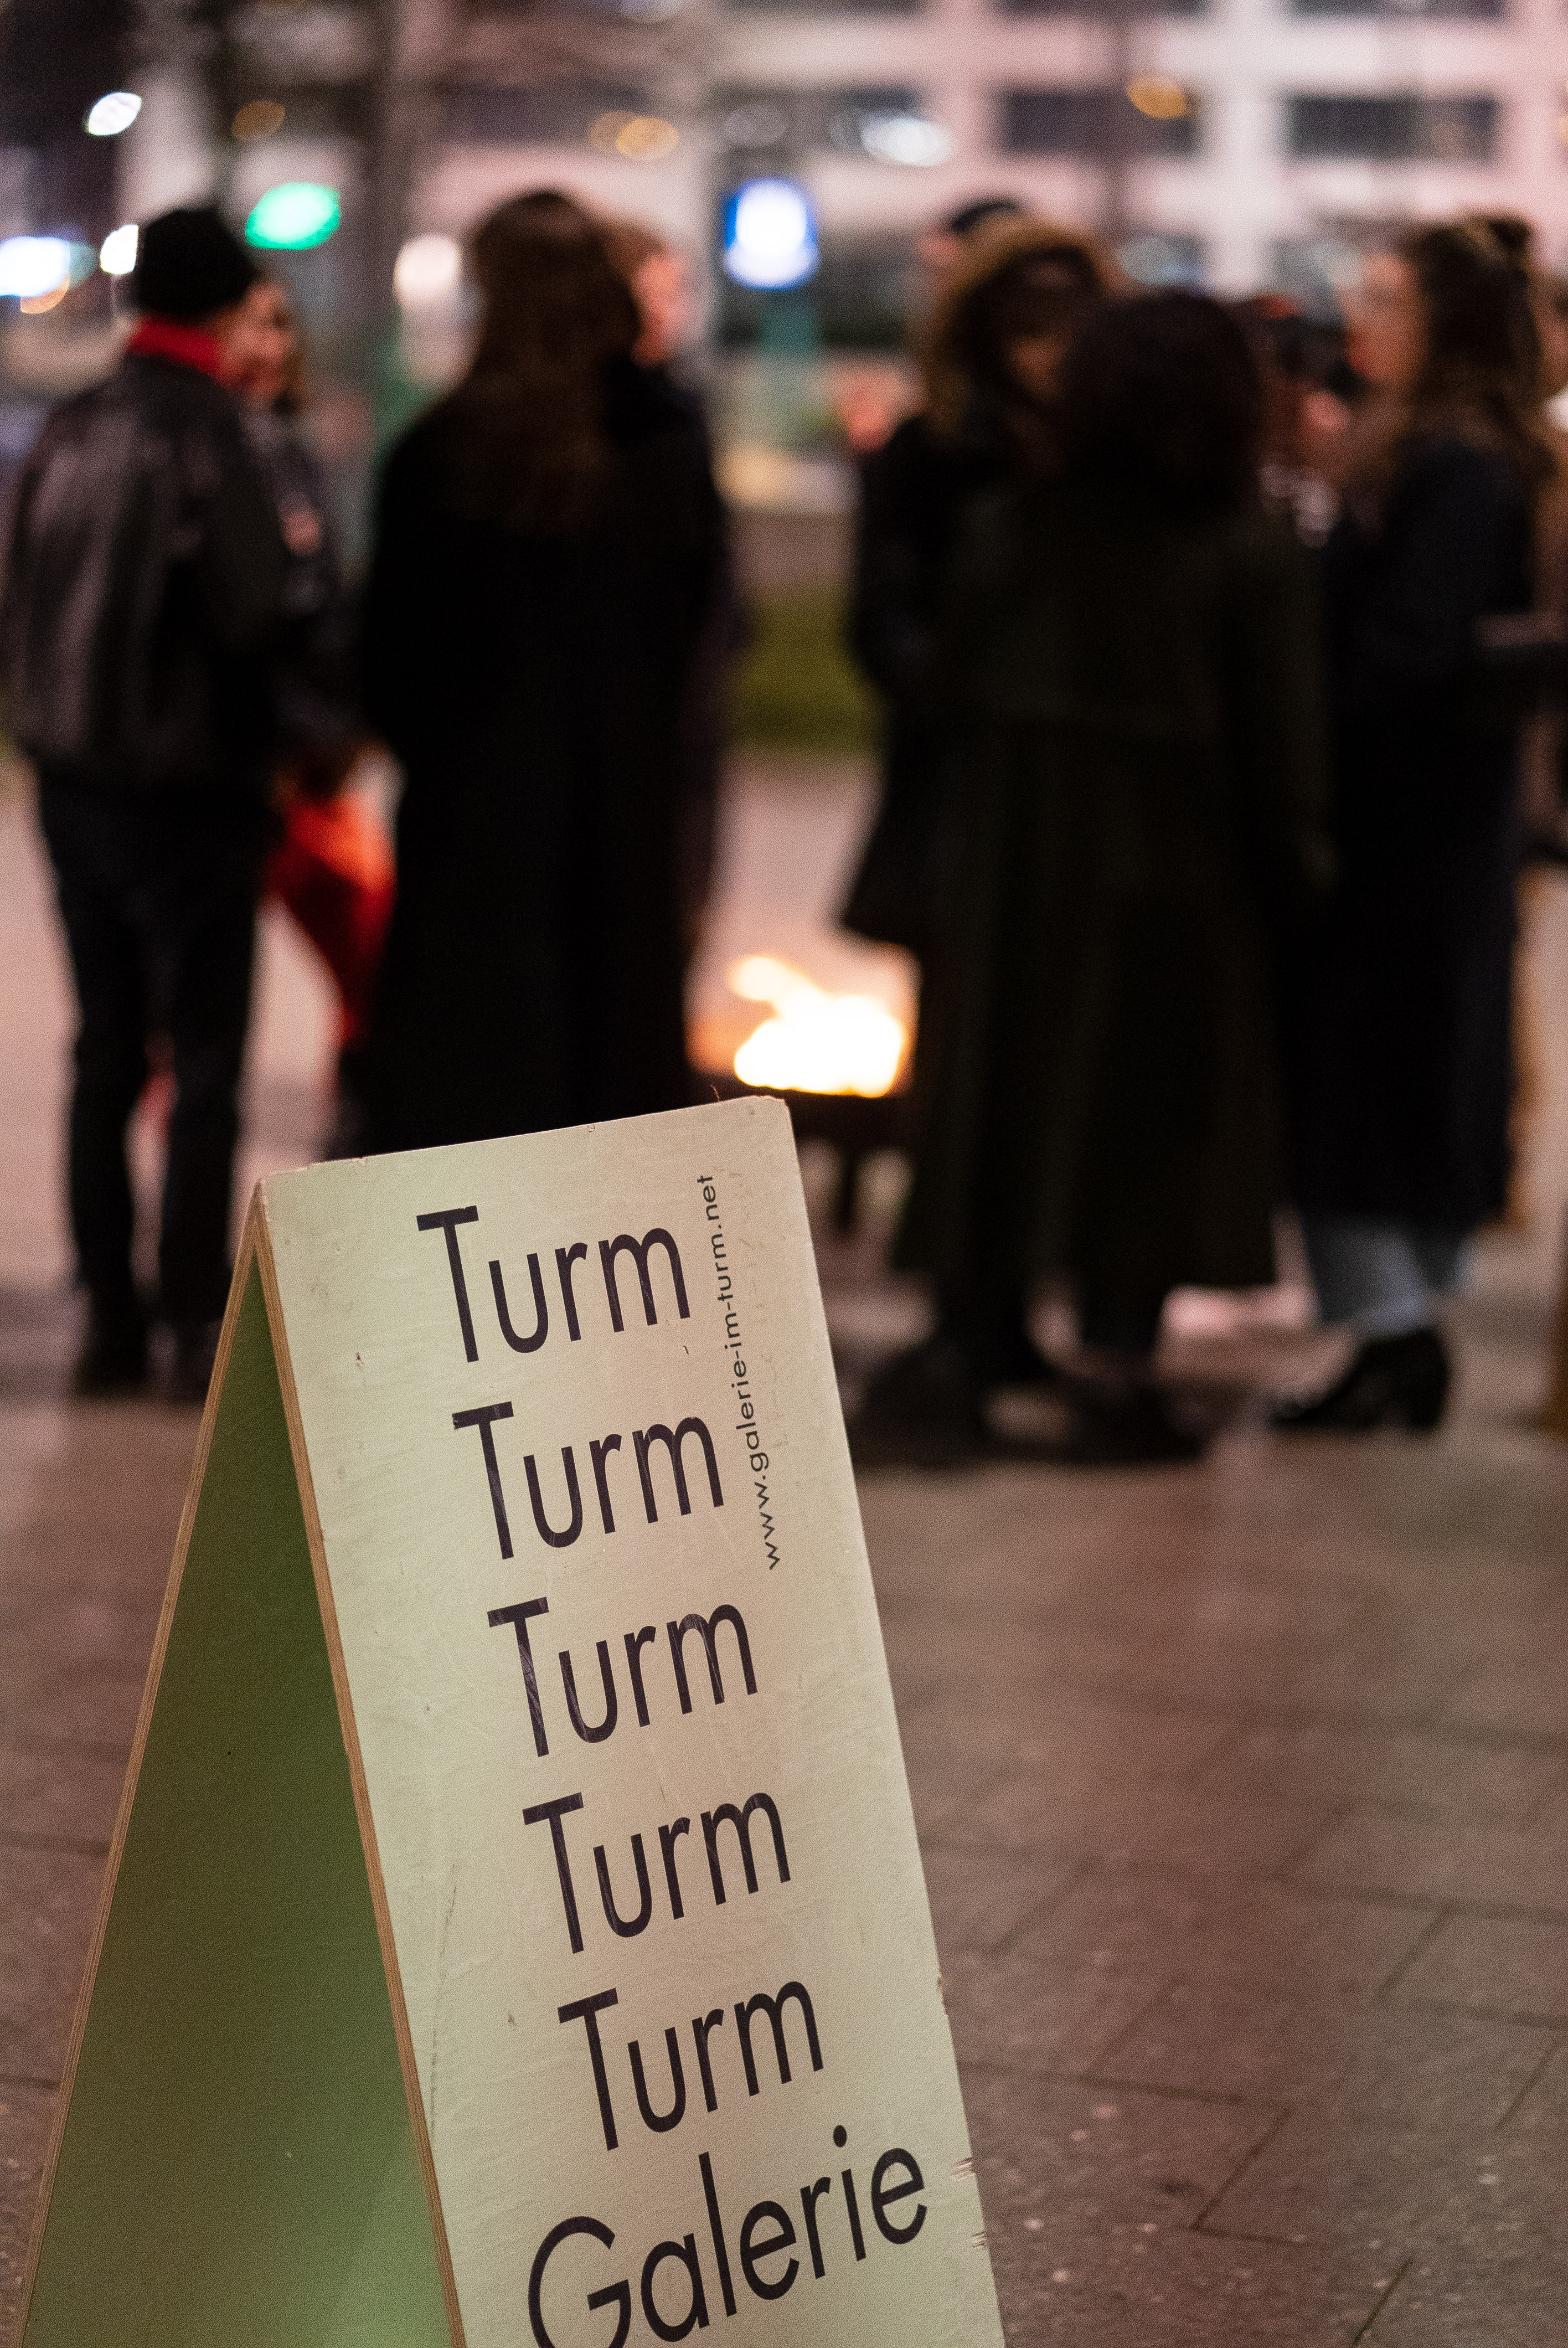 The photo shows in the foreground a sandwich-board sign for the exhibition location, Galerie im Turm. It is evening. In the background in the blur, people stand around a fire bowl.